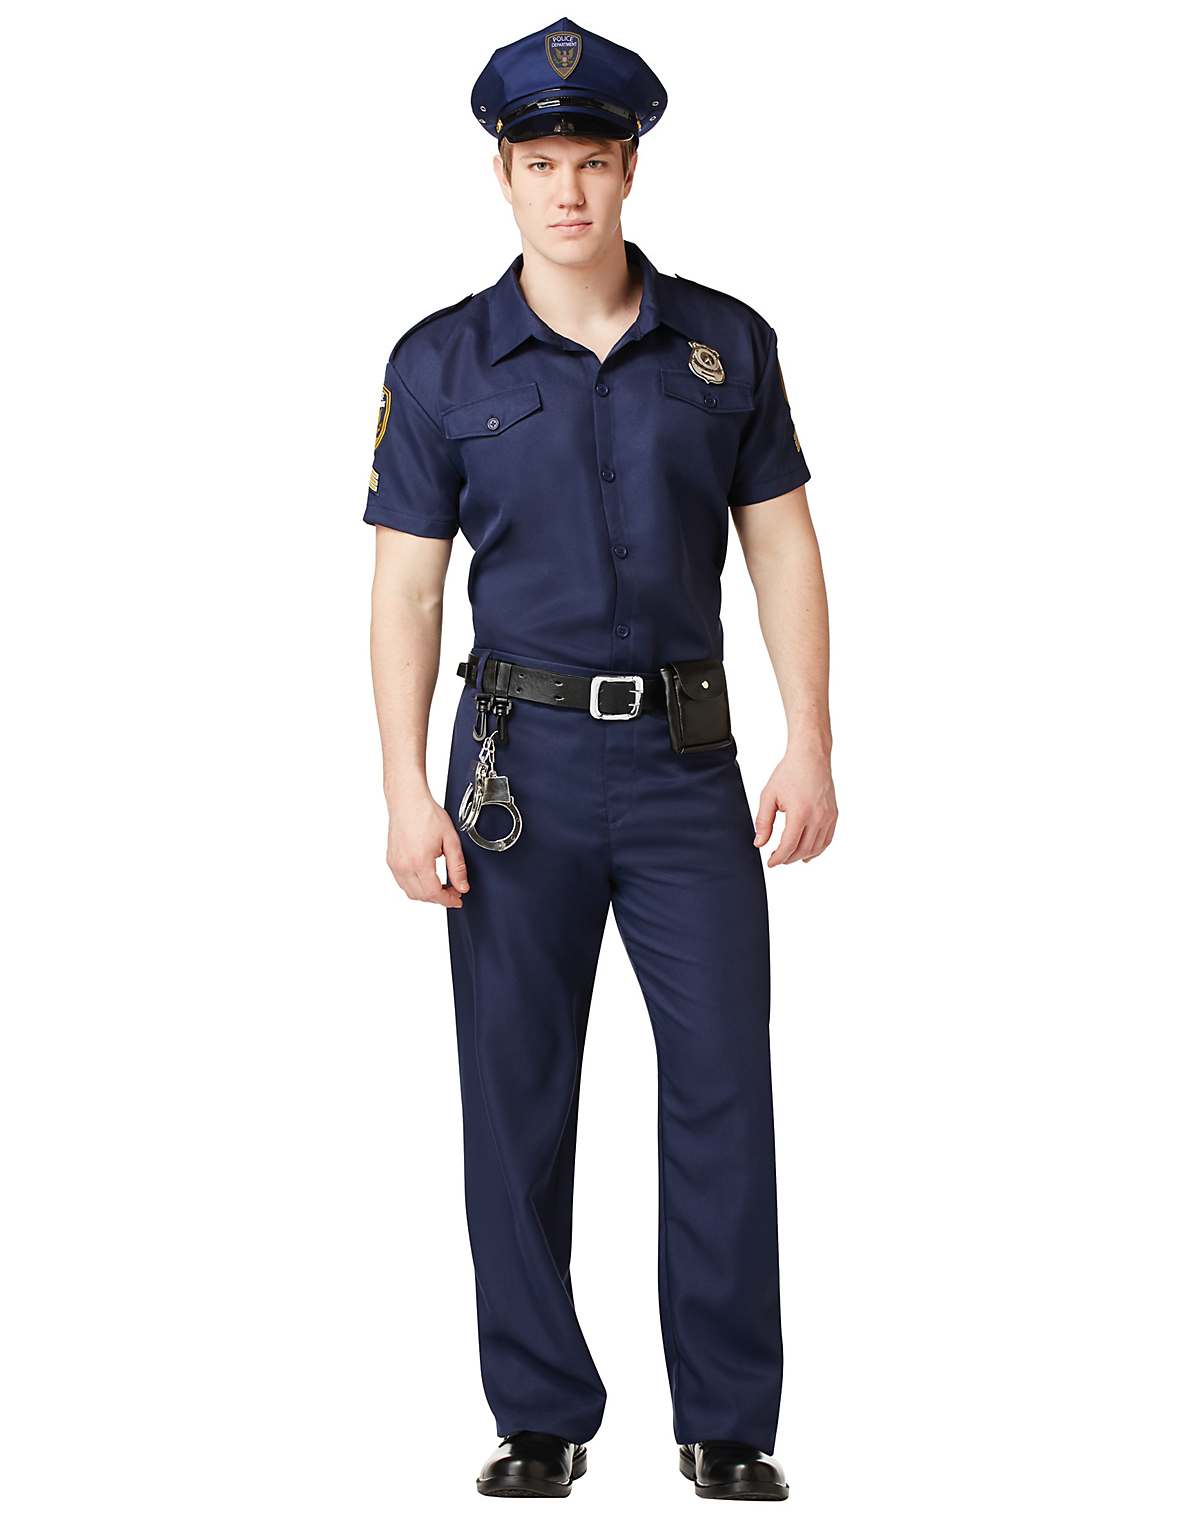 Adult Police Officer Costume - Deluxe - Spirithalloween.com